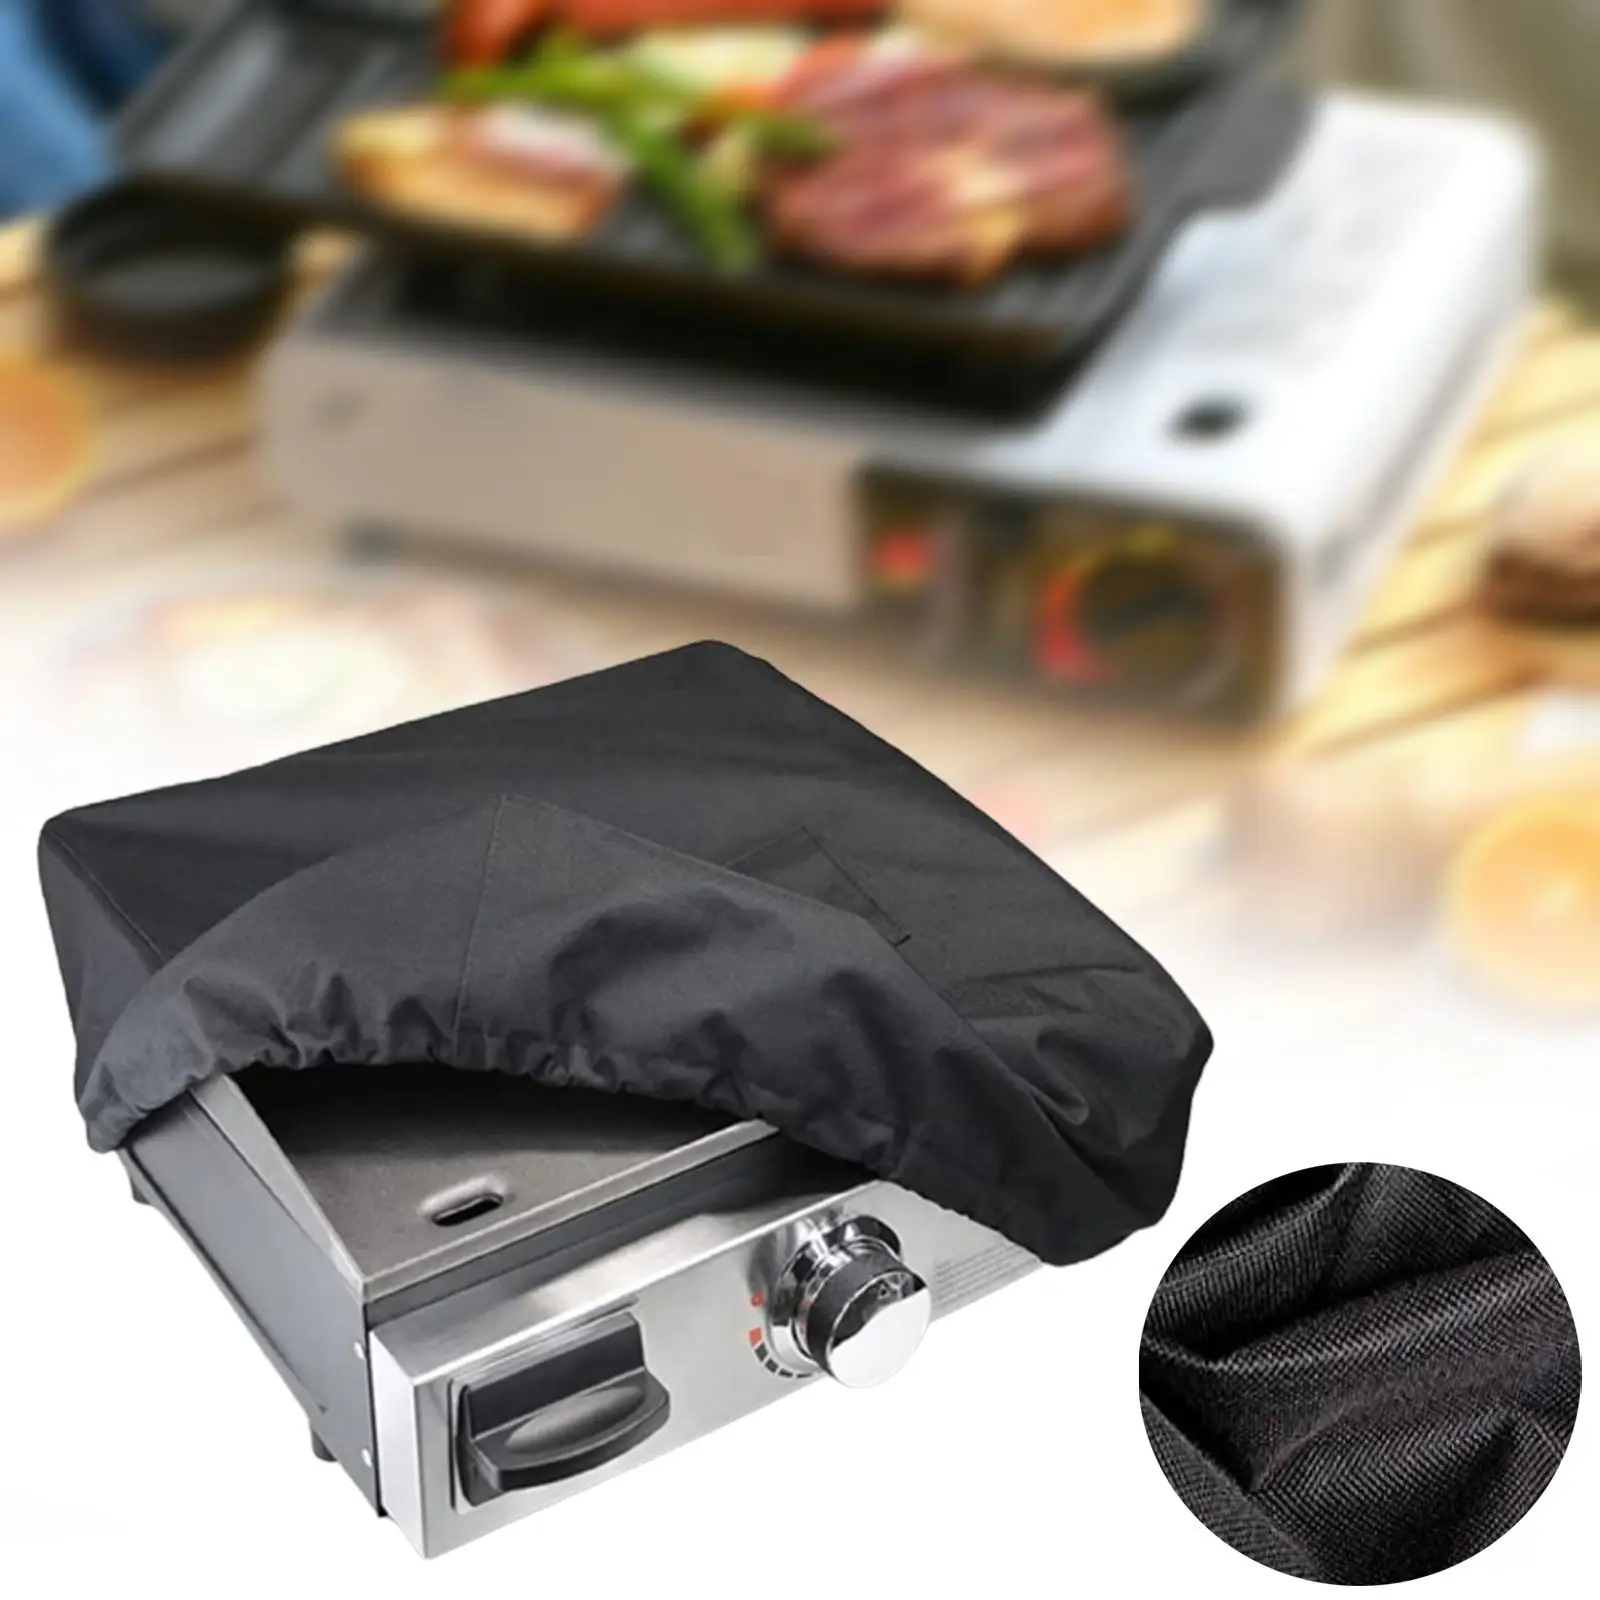 17inch Table Top Grill Cover Heavy Duty Outdoor Use Water Resistant for 17